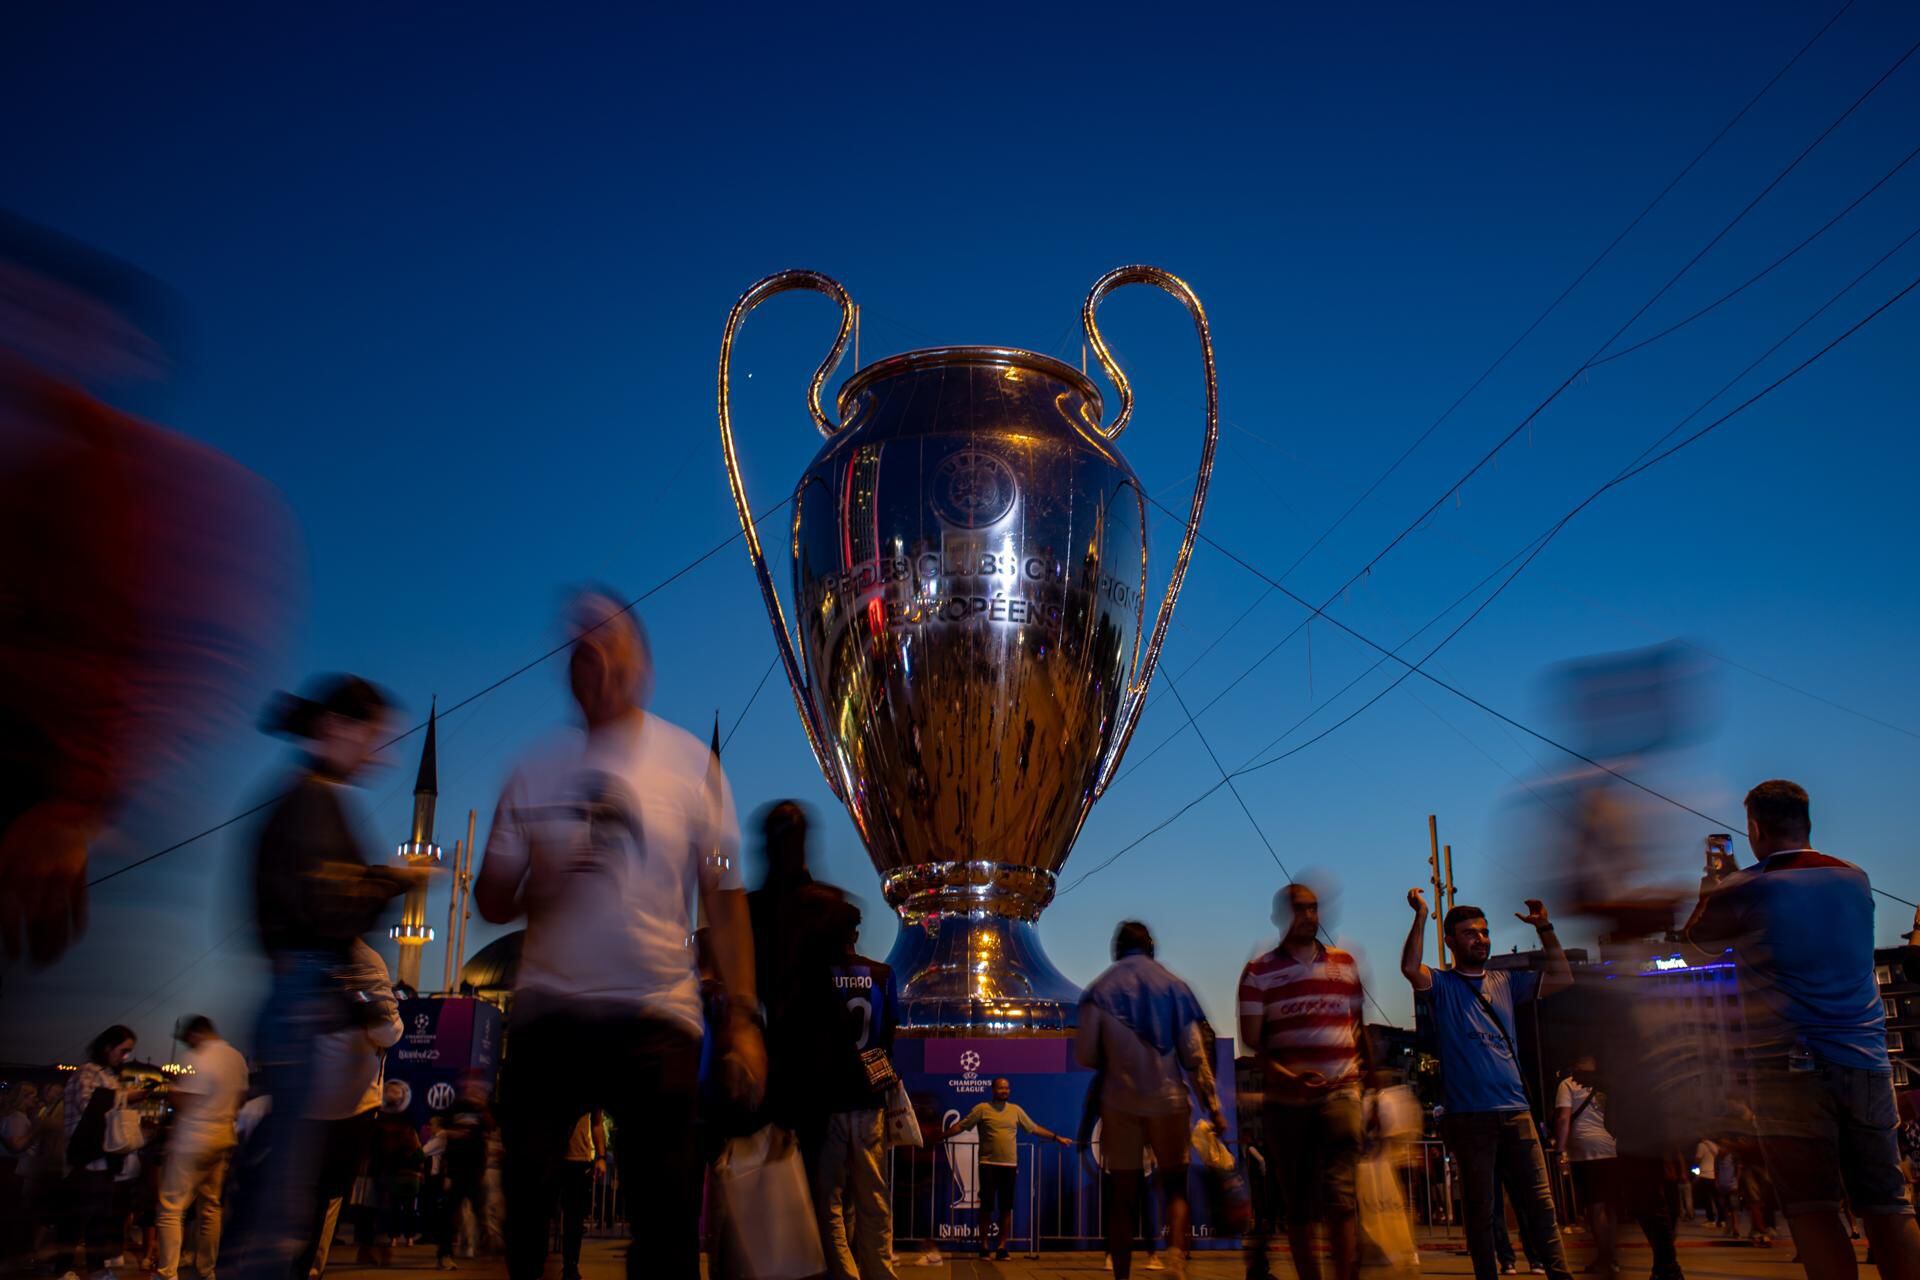 Istanbul (Turkey), 09/06/2023.- People walk past a huge model of the UEFA Champions League trophy backdropped by the Taksim Mosque in the Taksim Square in Istanbul, Turkey, 09 June 2023. Inter Milan faces Manchester City in the UEFA Champions League Final in Istanbul on 10 June 2023. (Liga de Campeones, Turquía, Estanbul) EFE/EPA/MARTIN DIVISEK
